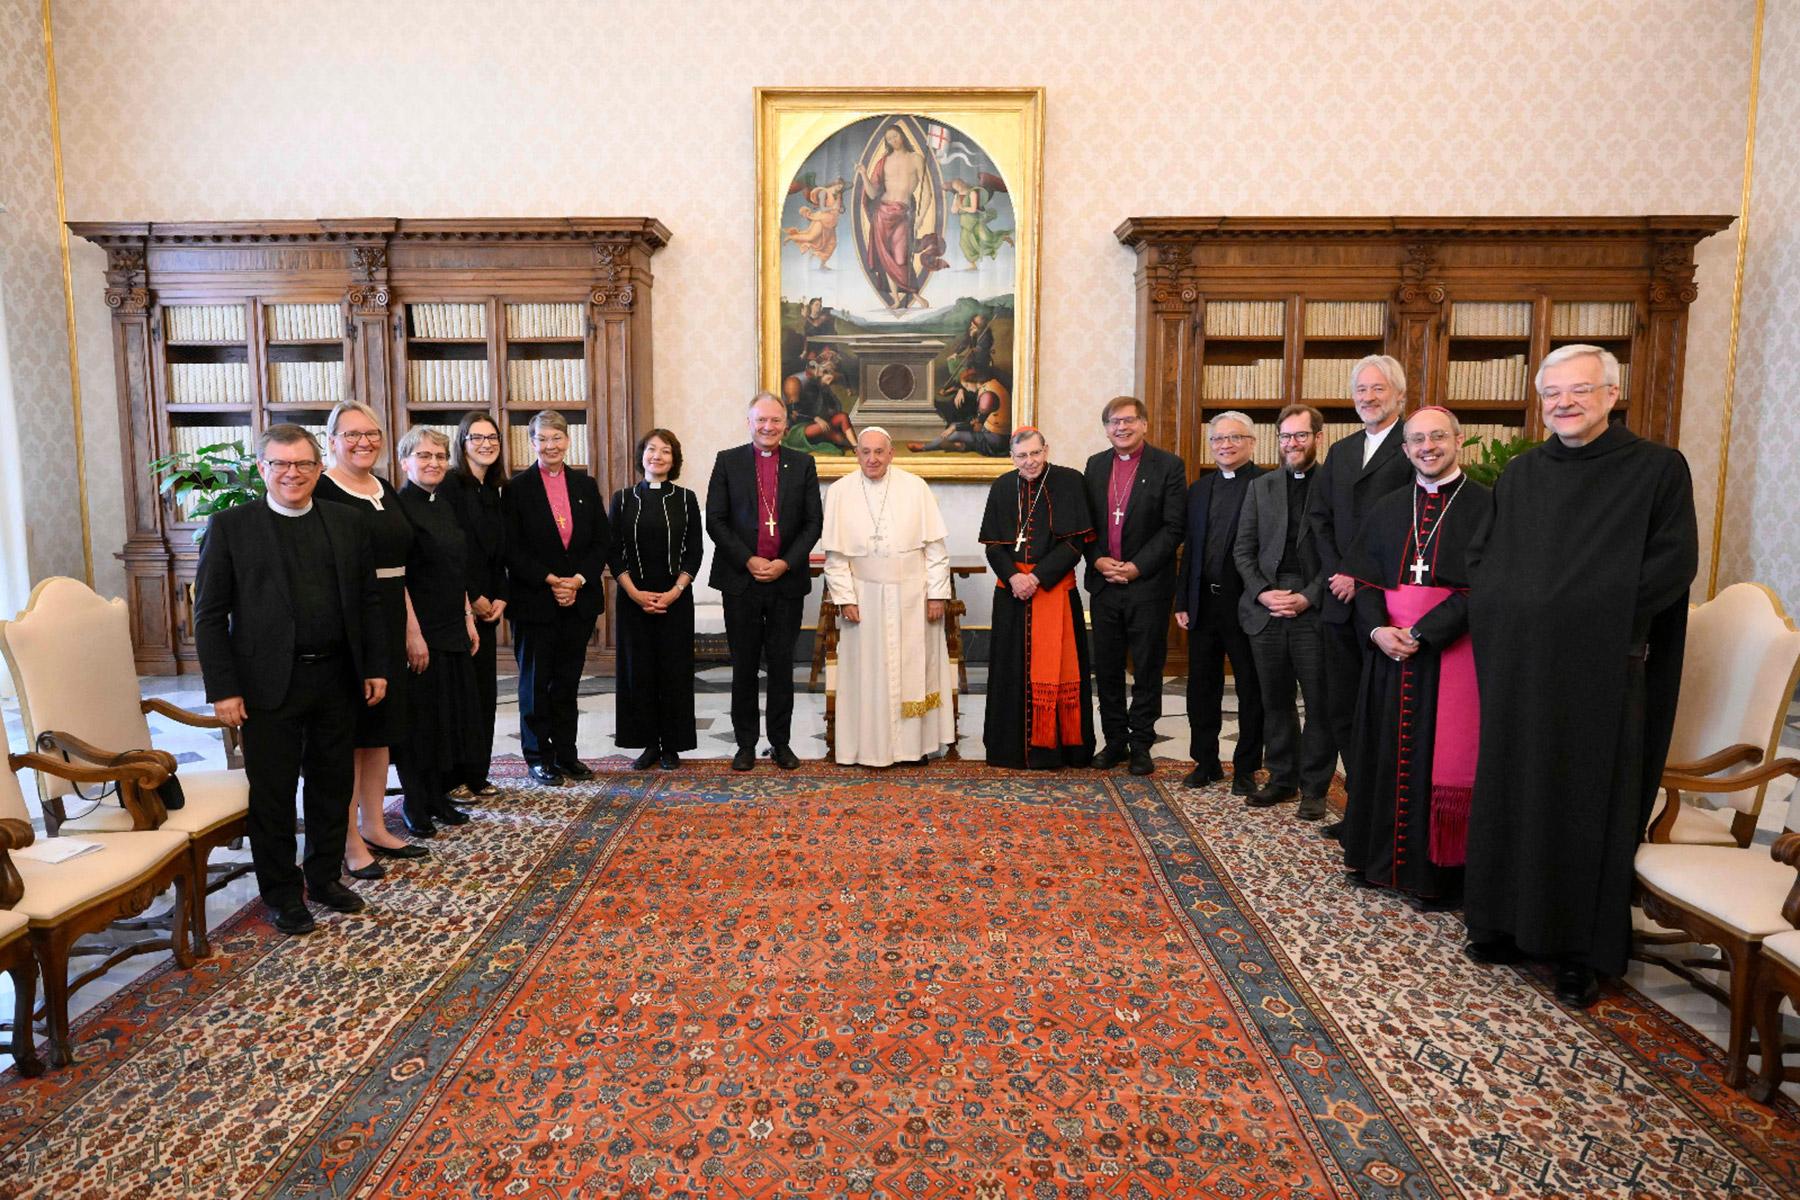 Pope Francis meets with LWF delegation in private audience in the Vatican. Photo: VaticanMedia